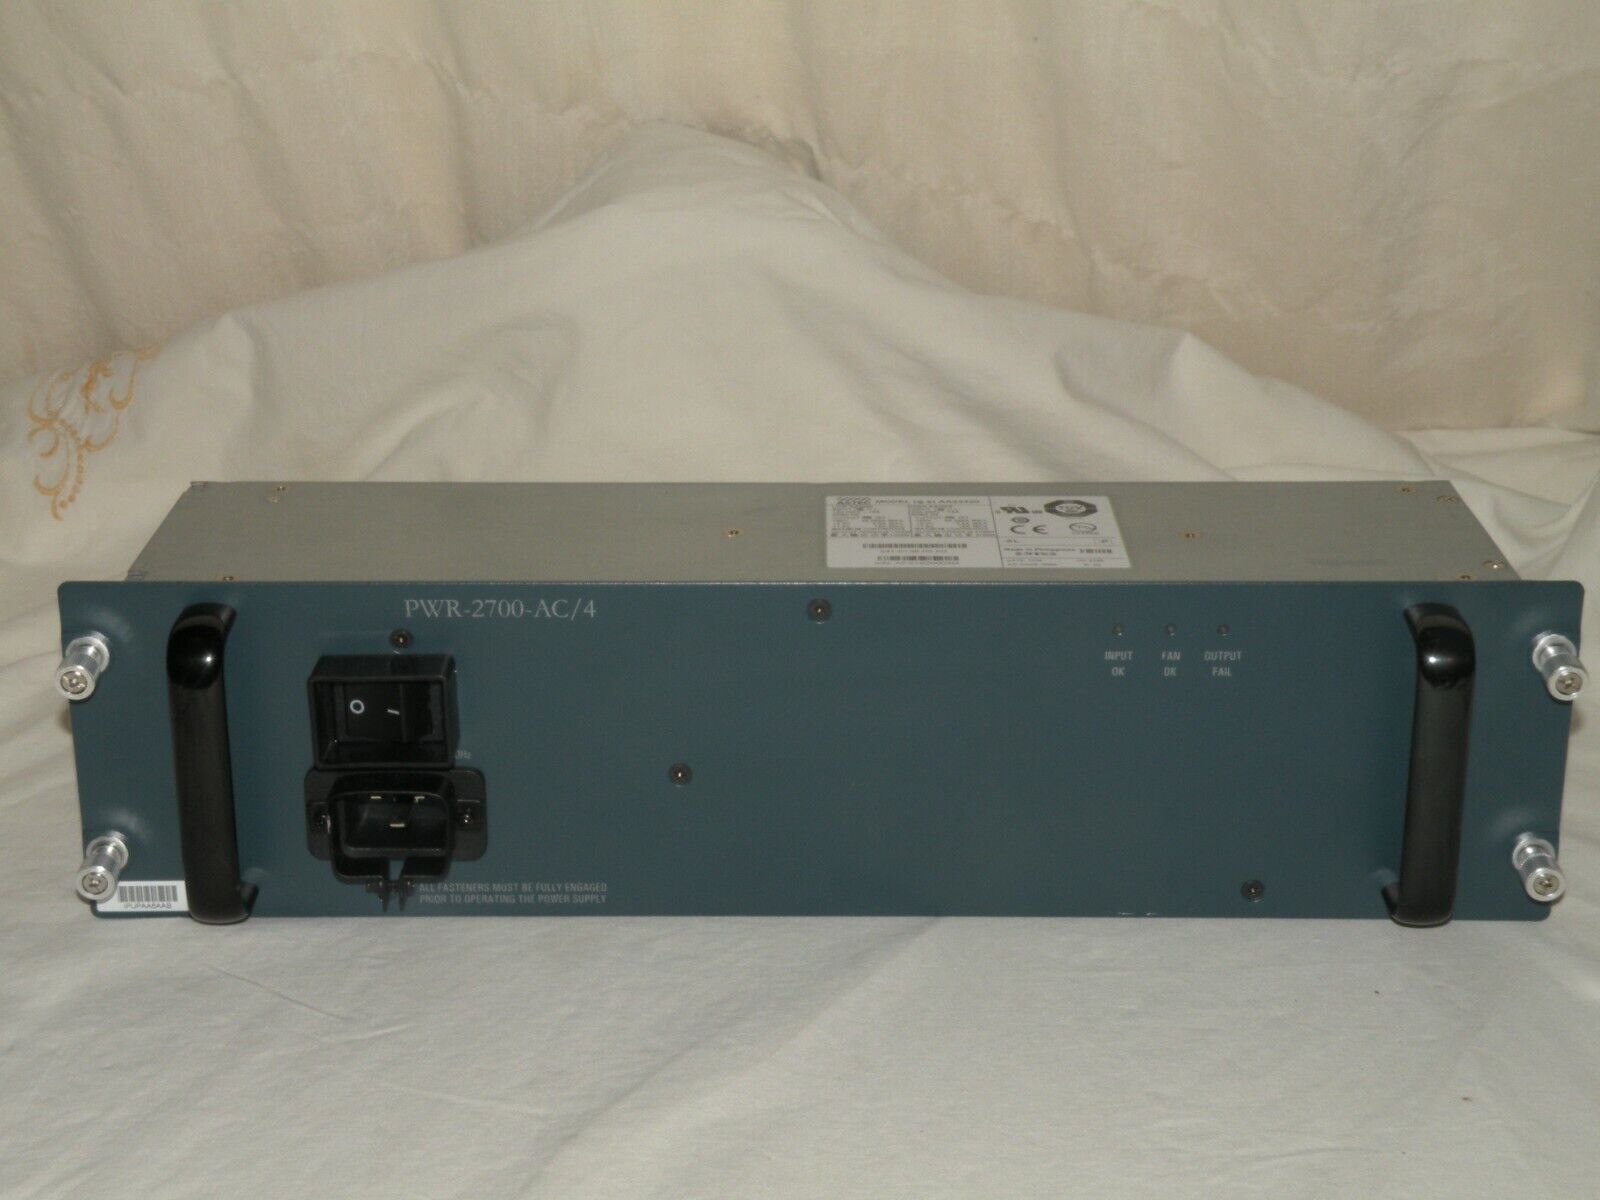 Astec AA23420, 2700W Power Supply For Cisco Servers, PWR-2700-AC/4, Works Fine 